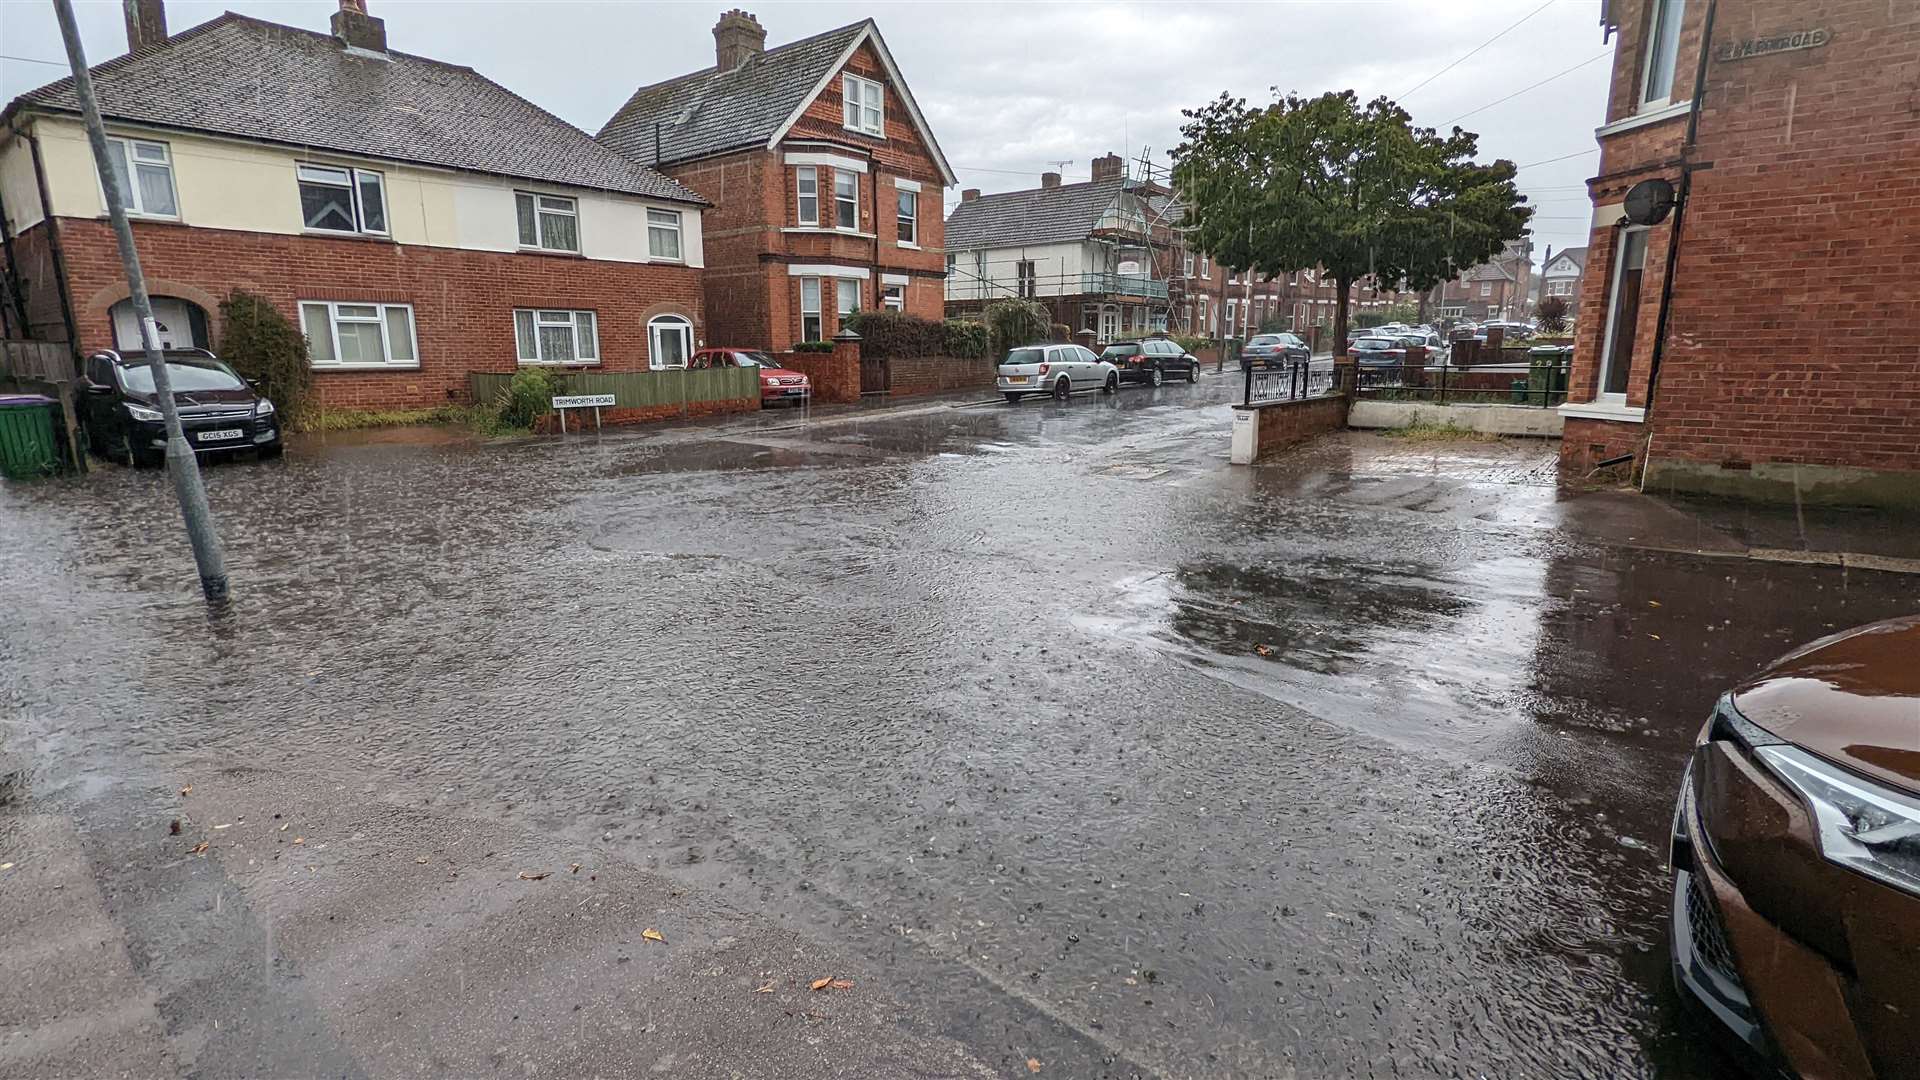 The dry spell was ended in dramatic fashion as sudden thundery rain storms hit Folkestone and turned these roads in Cheriton into rivers